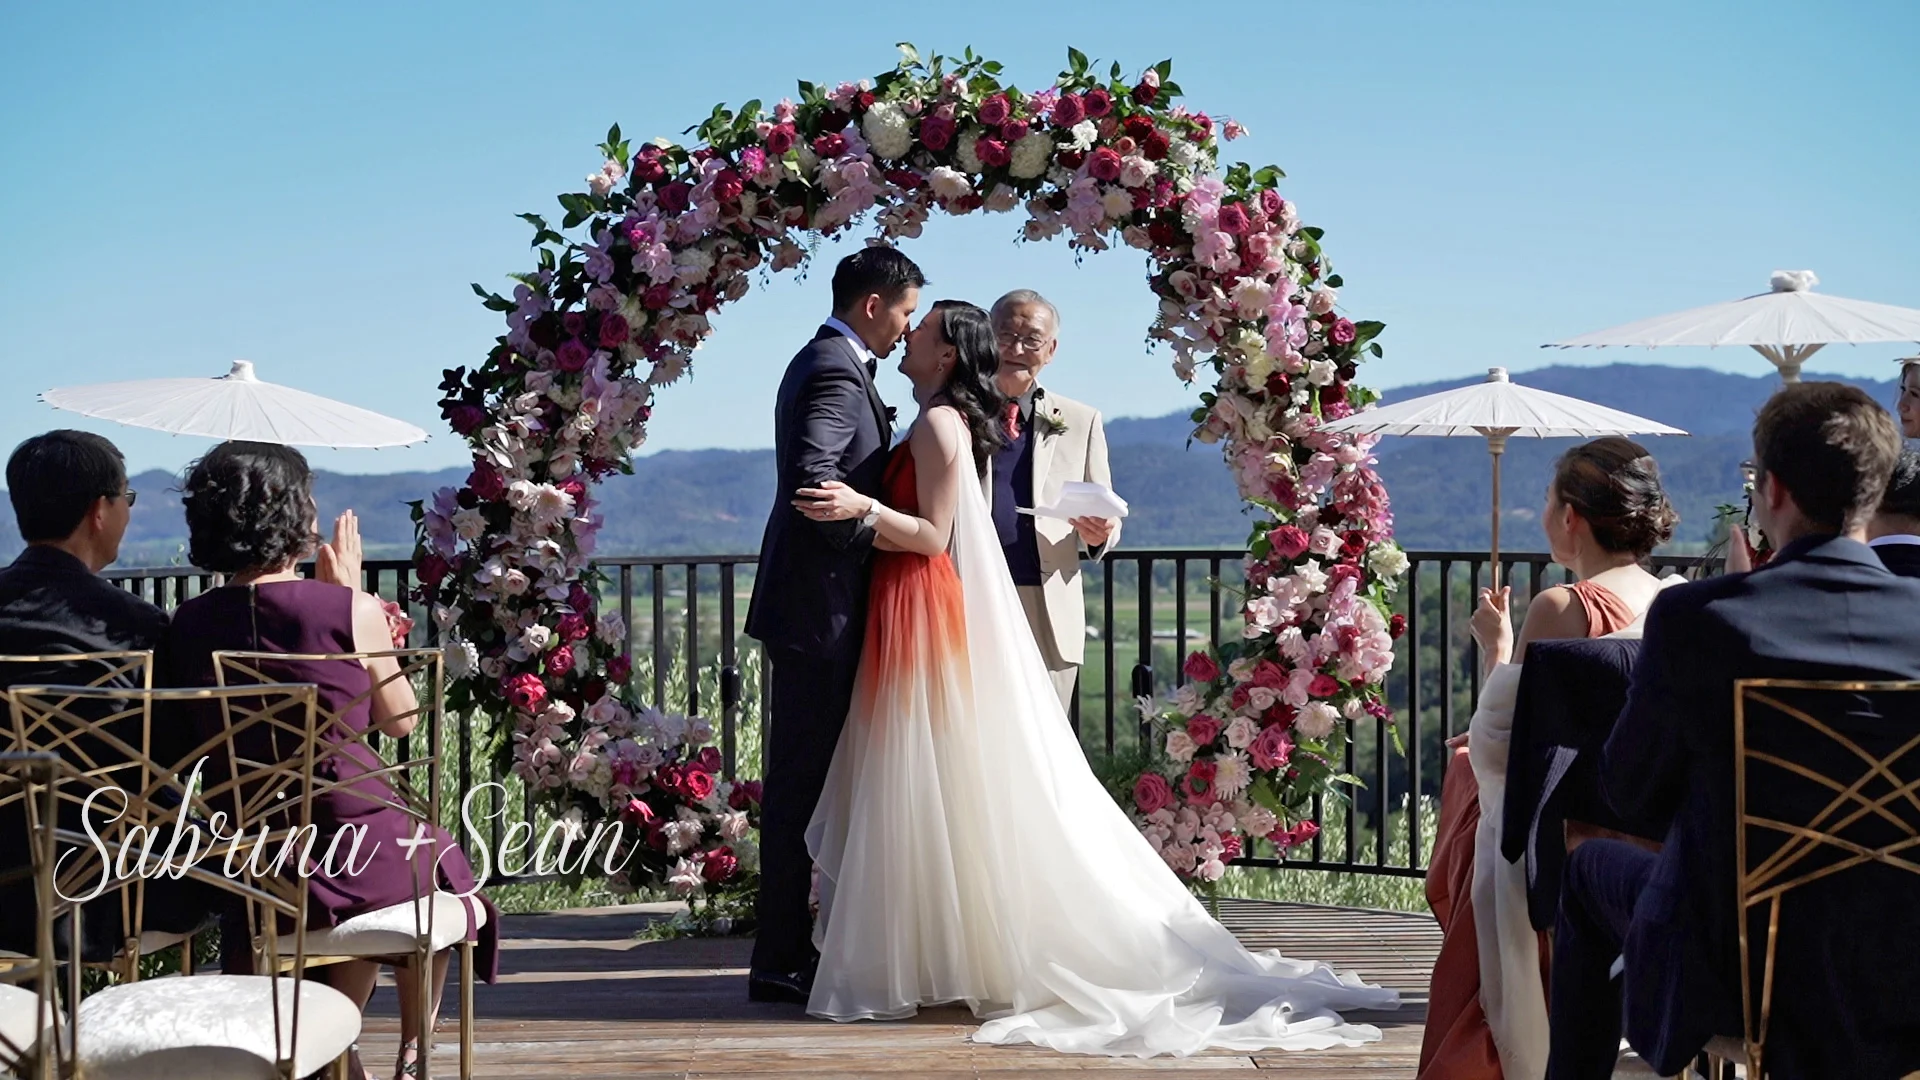 I found home with you: Sabrina + Sean's wedding from Auberge du Soleil on  Vimeo